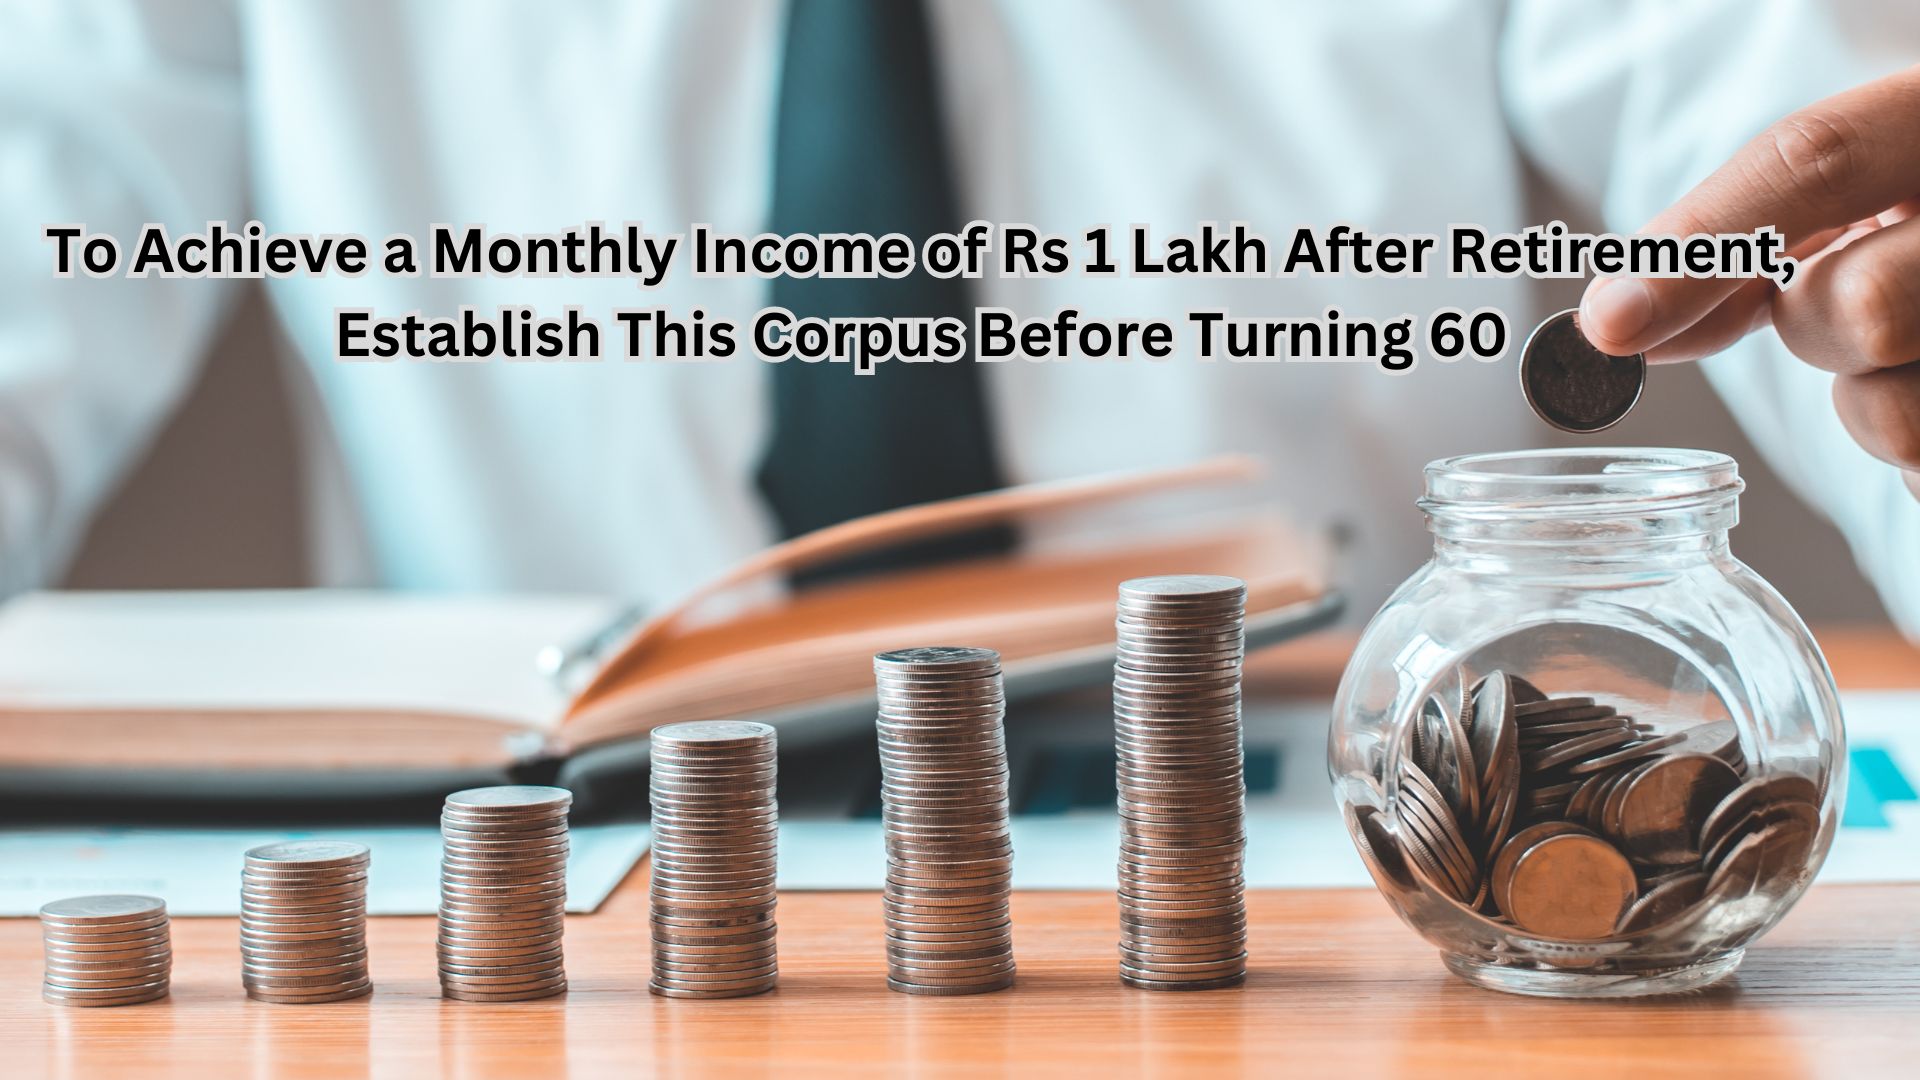 To Achieve a Monthly Income of Rs 1 Lakh After Retirement, Establish This Corpus Before Turning 60